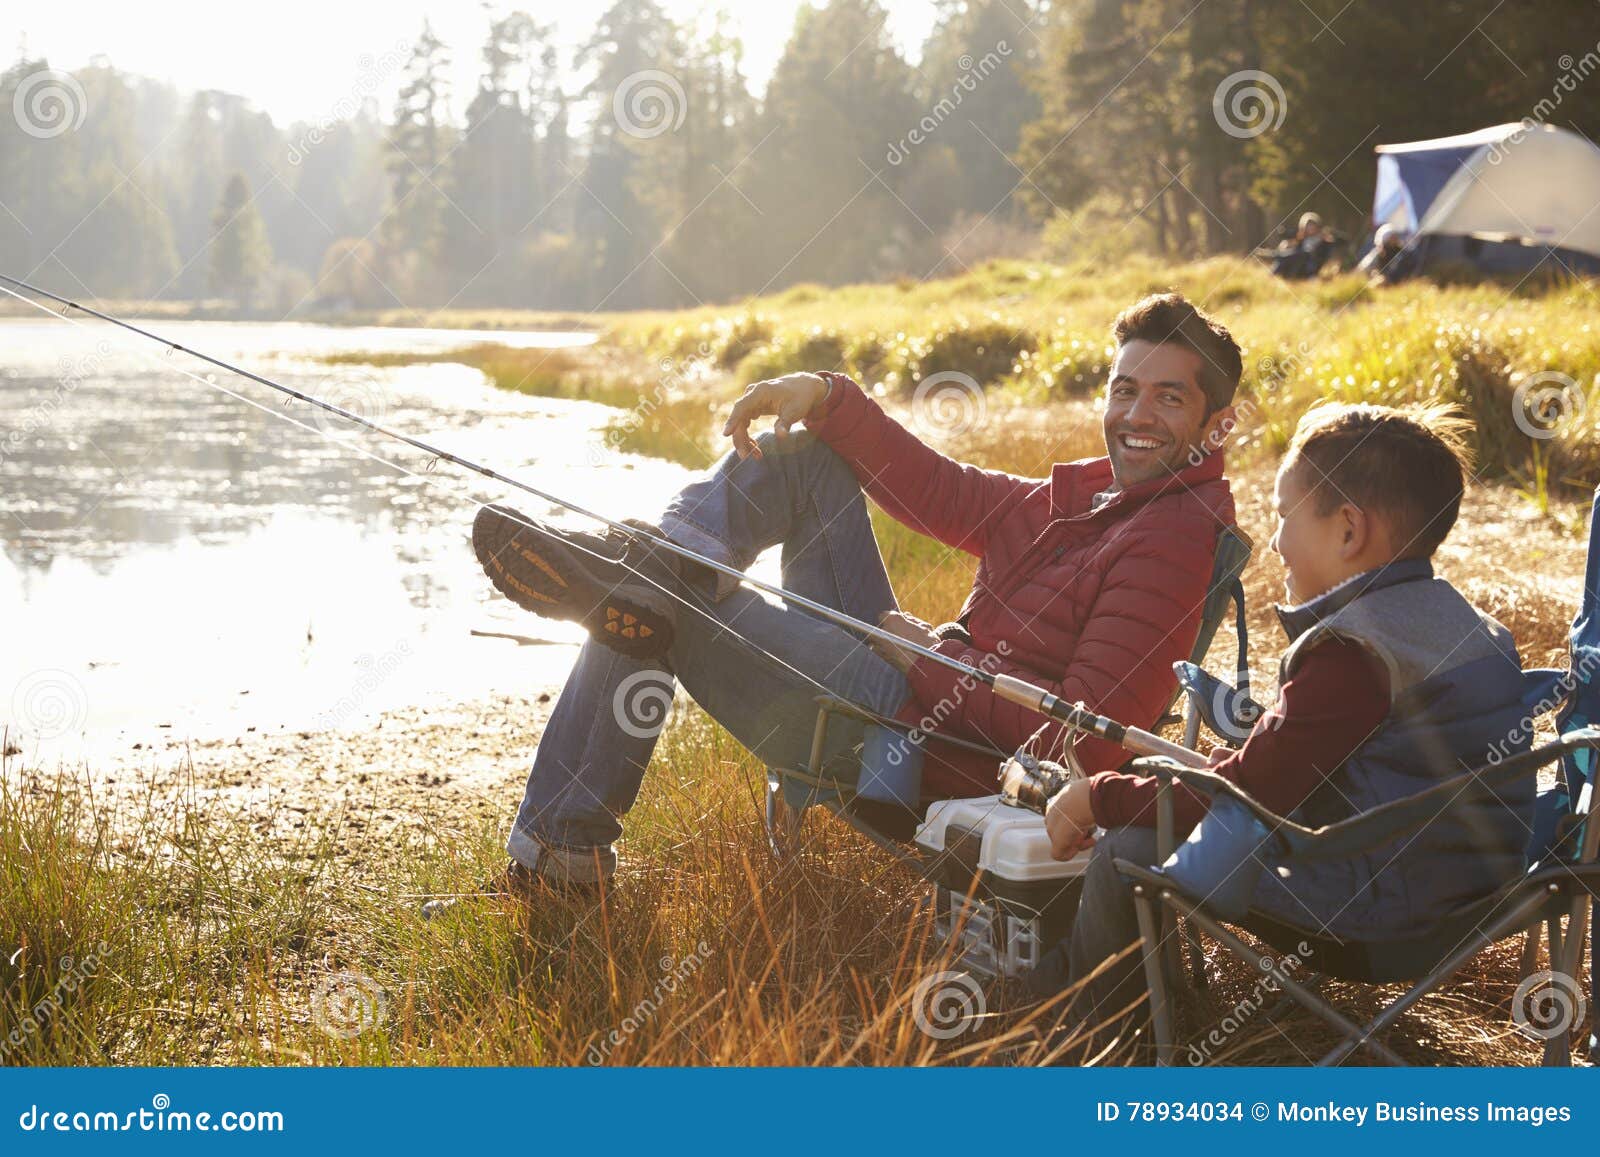 father and son fishing by a lake, dad looks to camera